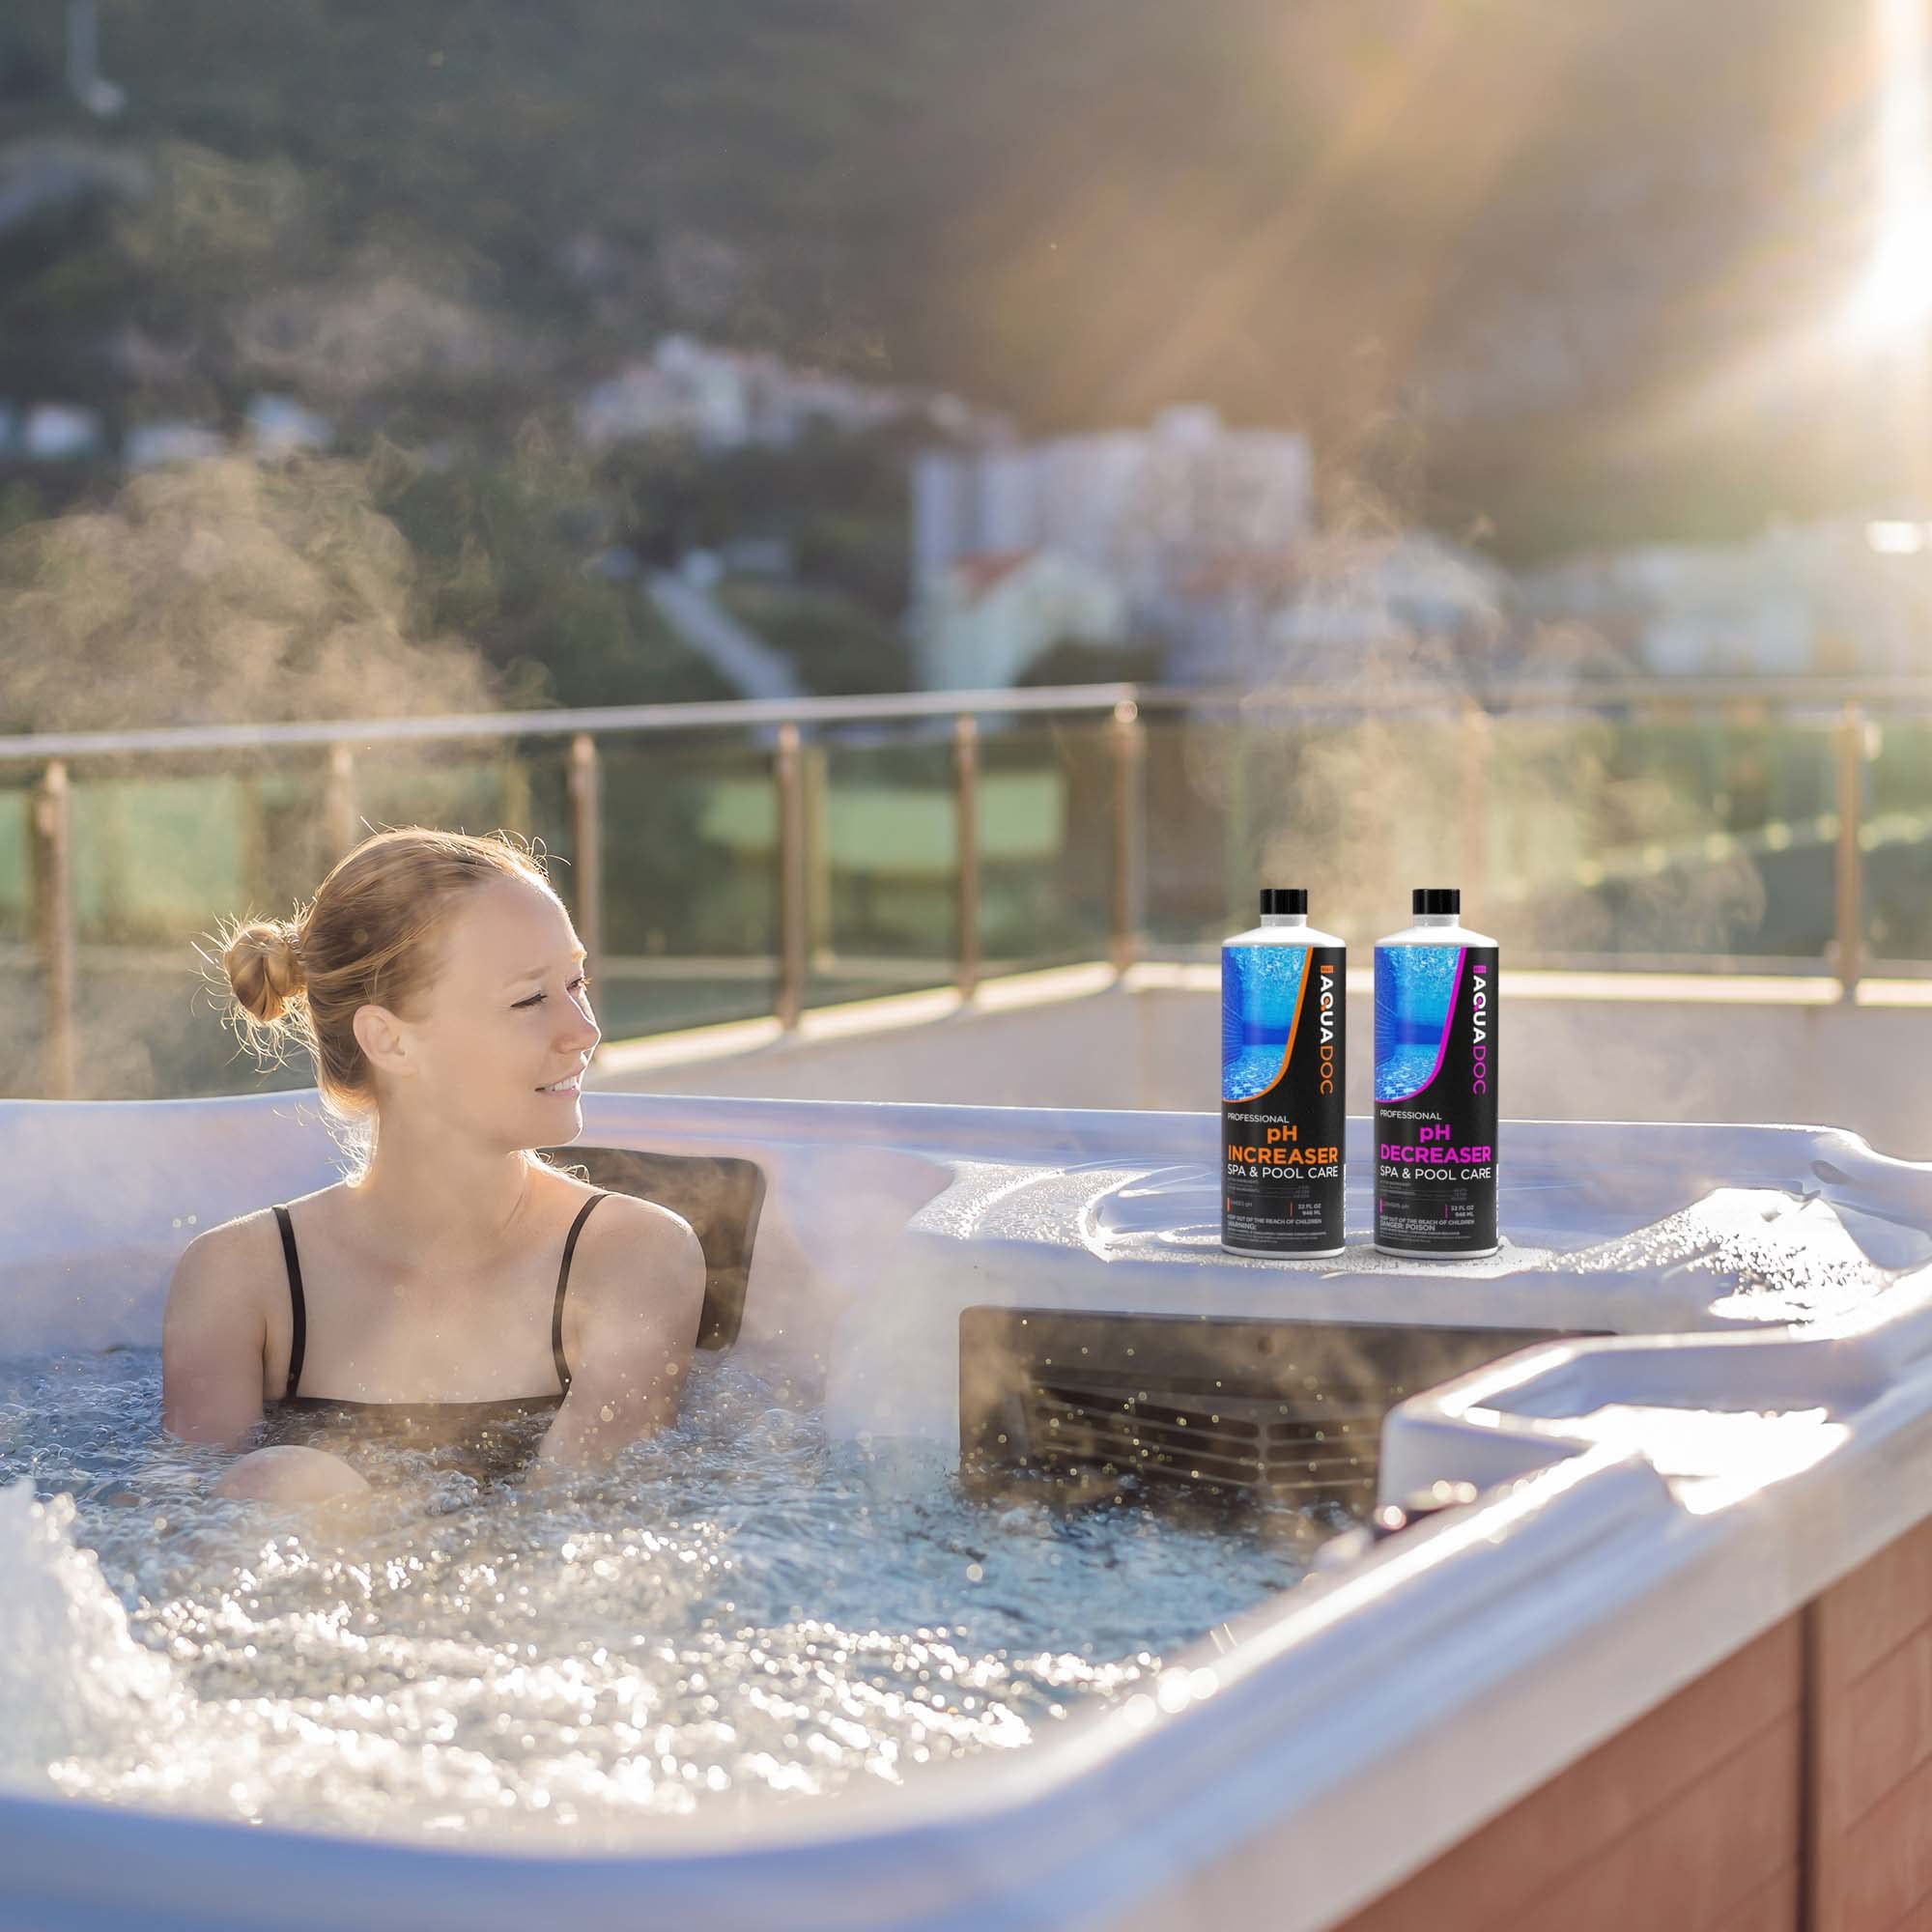 AquaDoc pH Increaser & Decreaser for Hot Tub - pH Up and Down for Hot Tub Spa - Balance Your pH Up and Down Levels - Adjust pH Levels for Indoor & Outdoor Hot Tub Maintenance